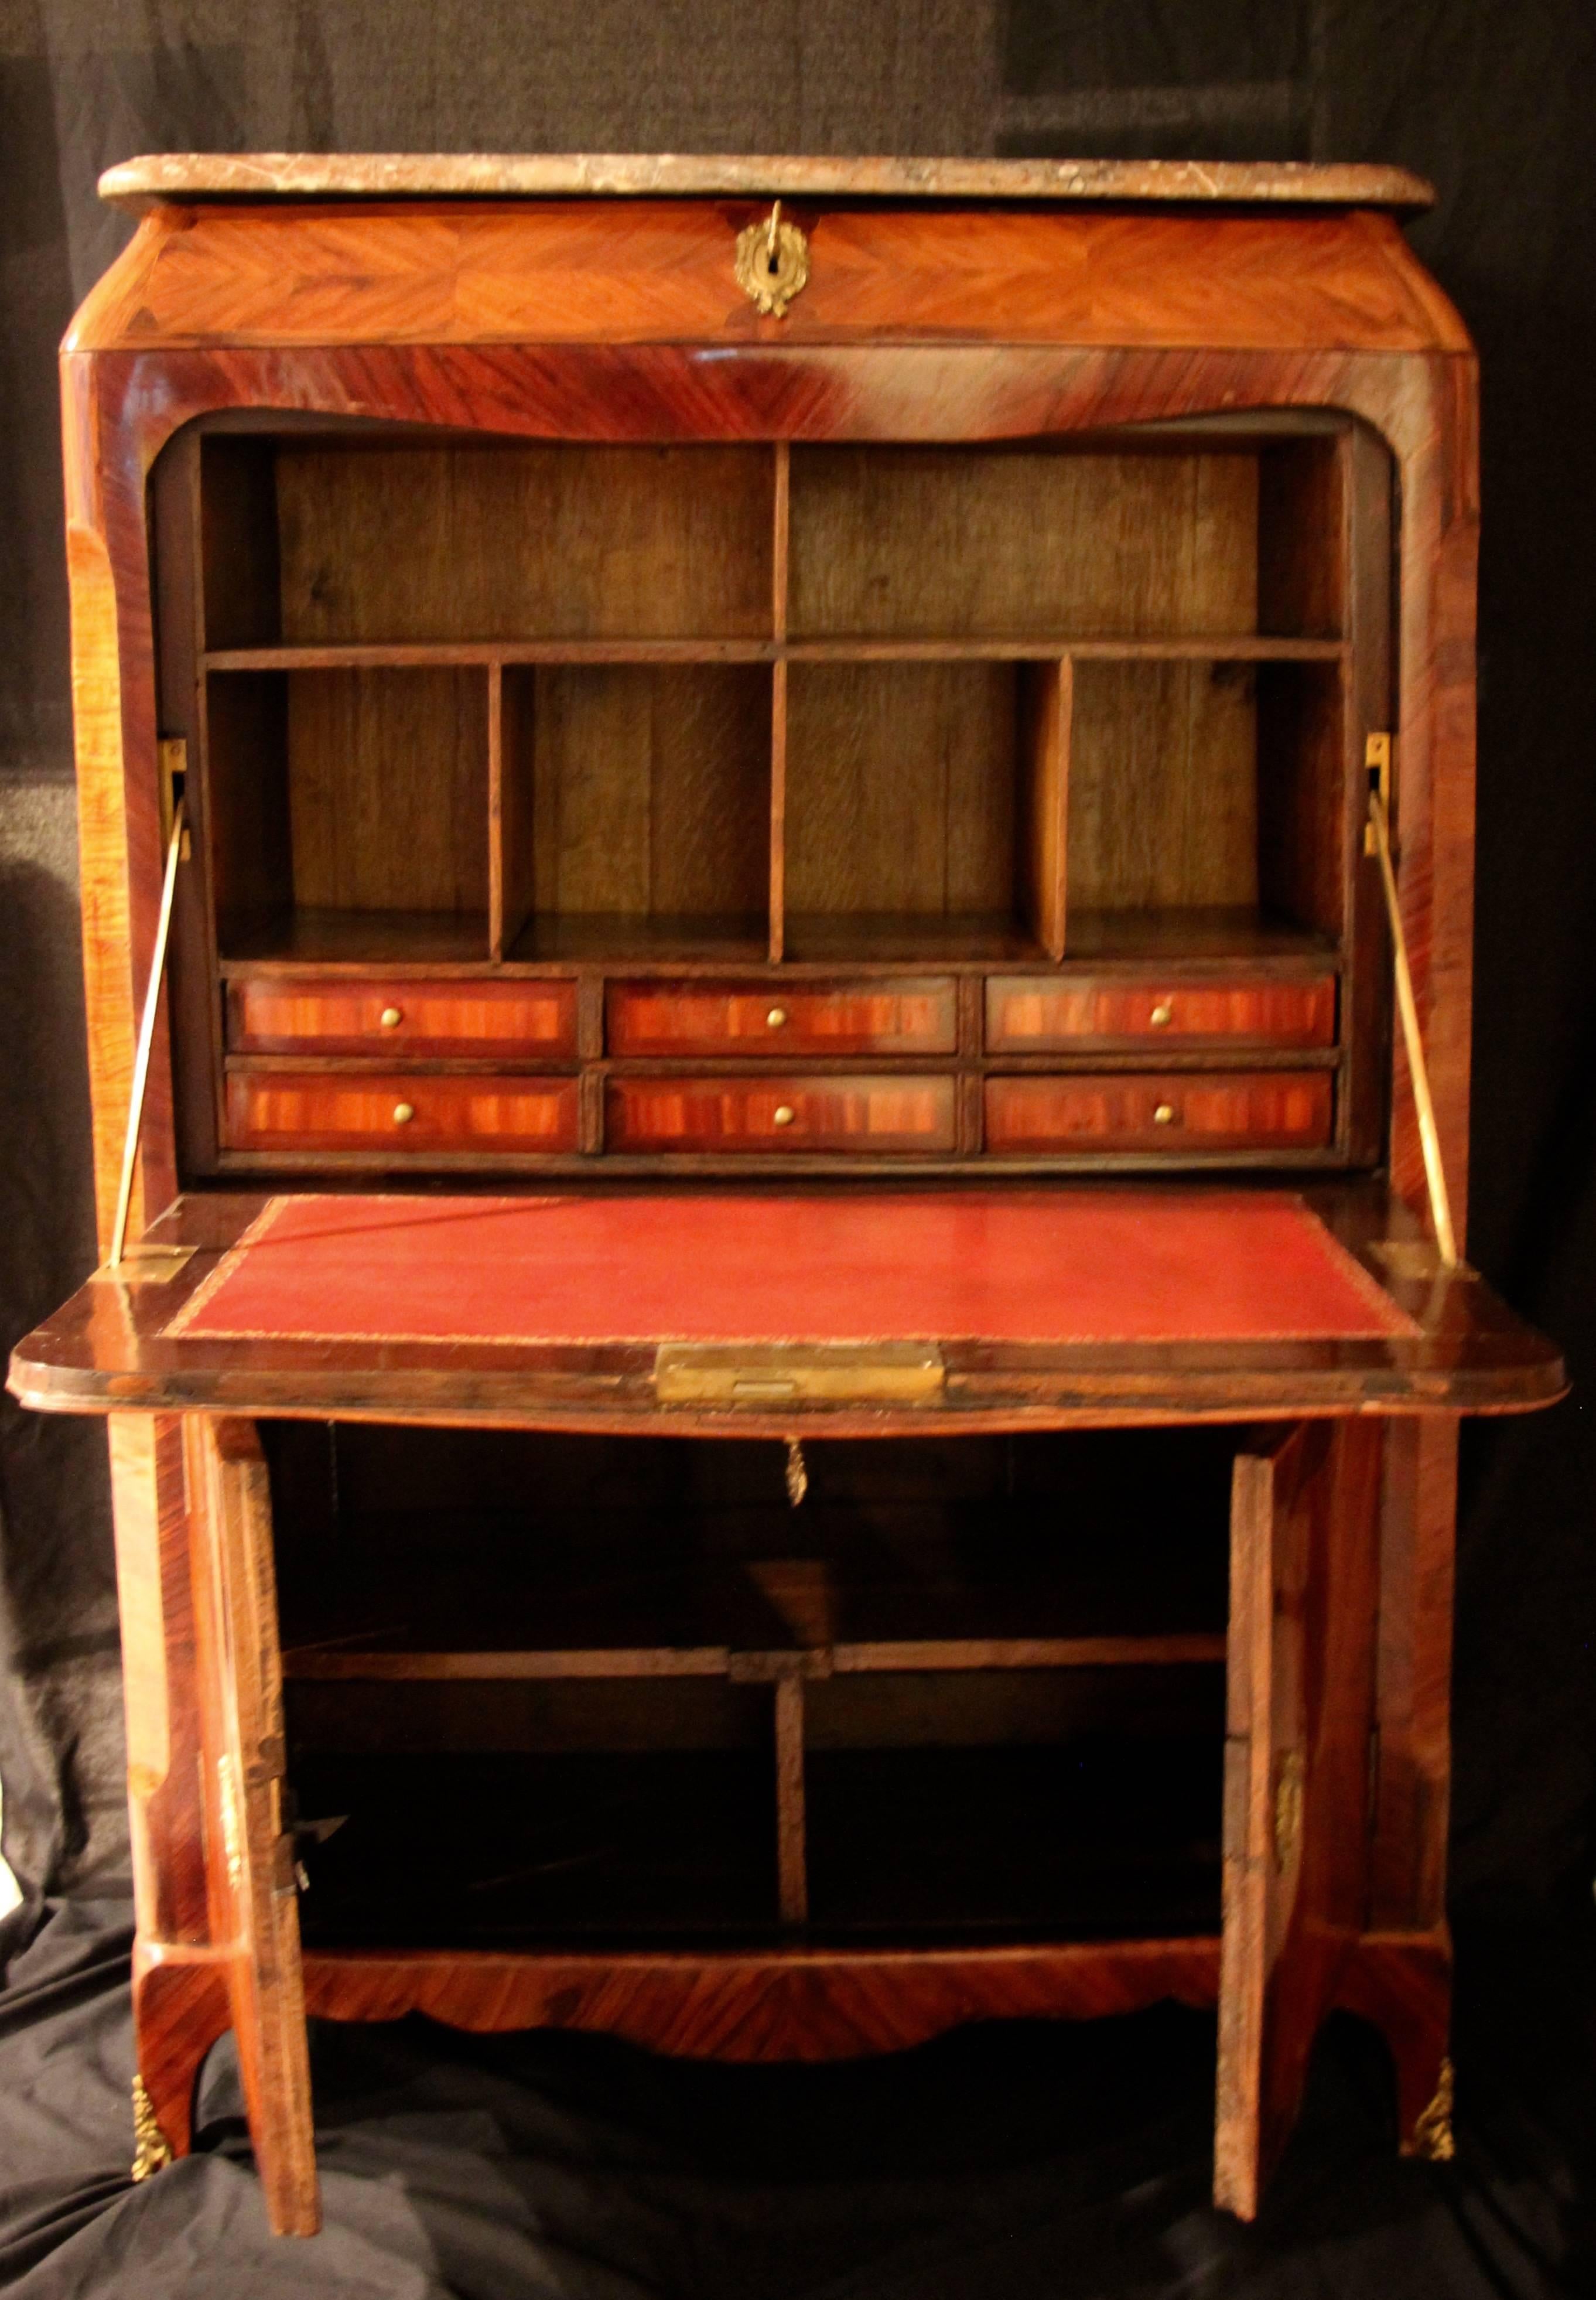 Fall top Louis XV secretary, kingwood and rosewood veneer on oak.
The rounded rectangular marble-top above a mirror veneered drawer and a cross banded quarter veneer drop front. Inside are six drawers and six open compartments. The writing surface